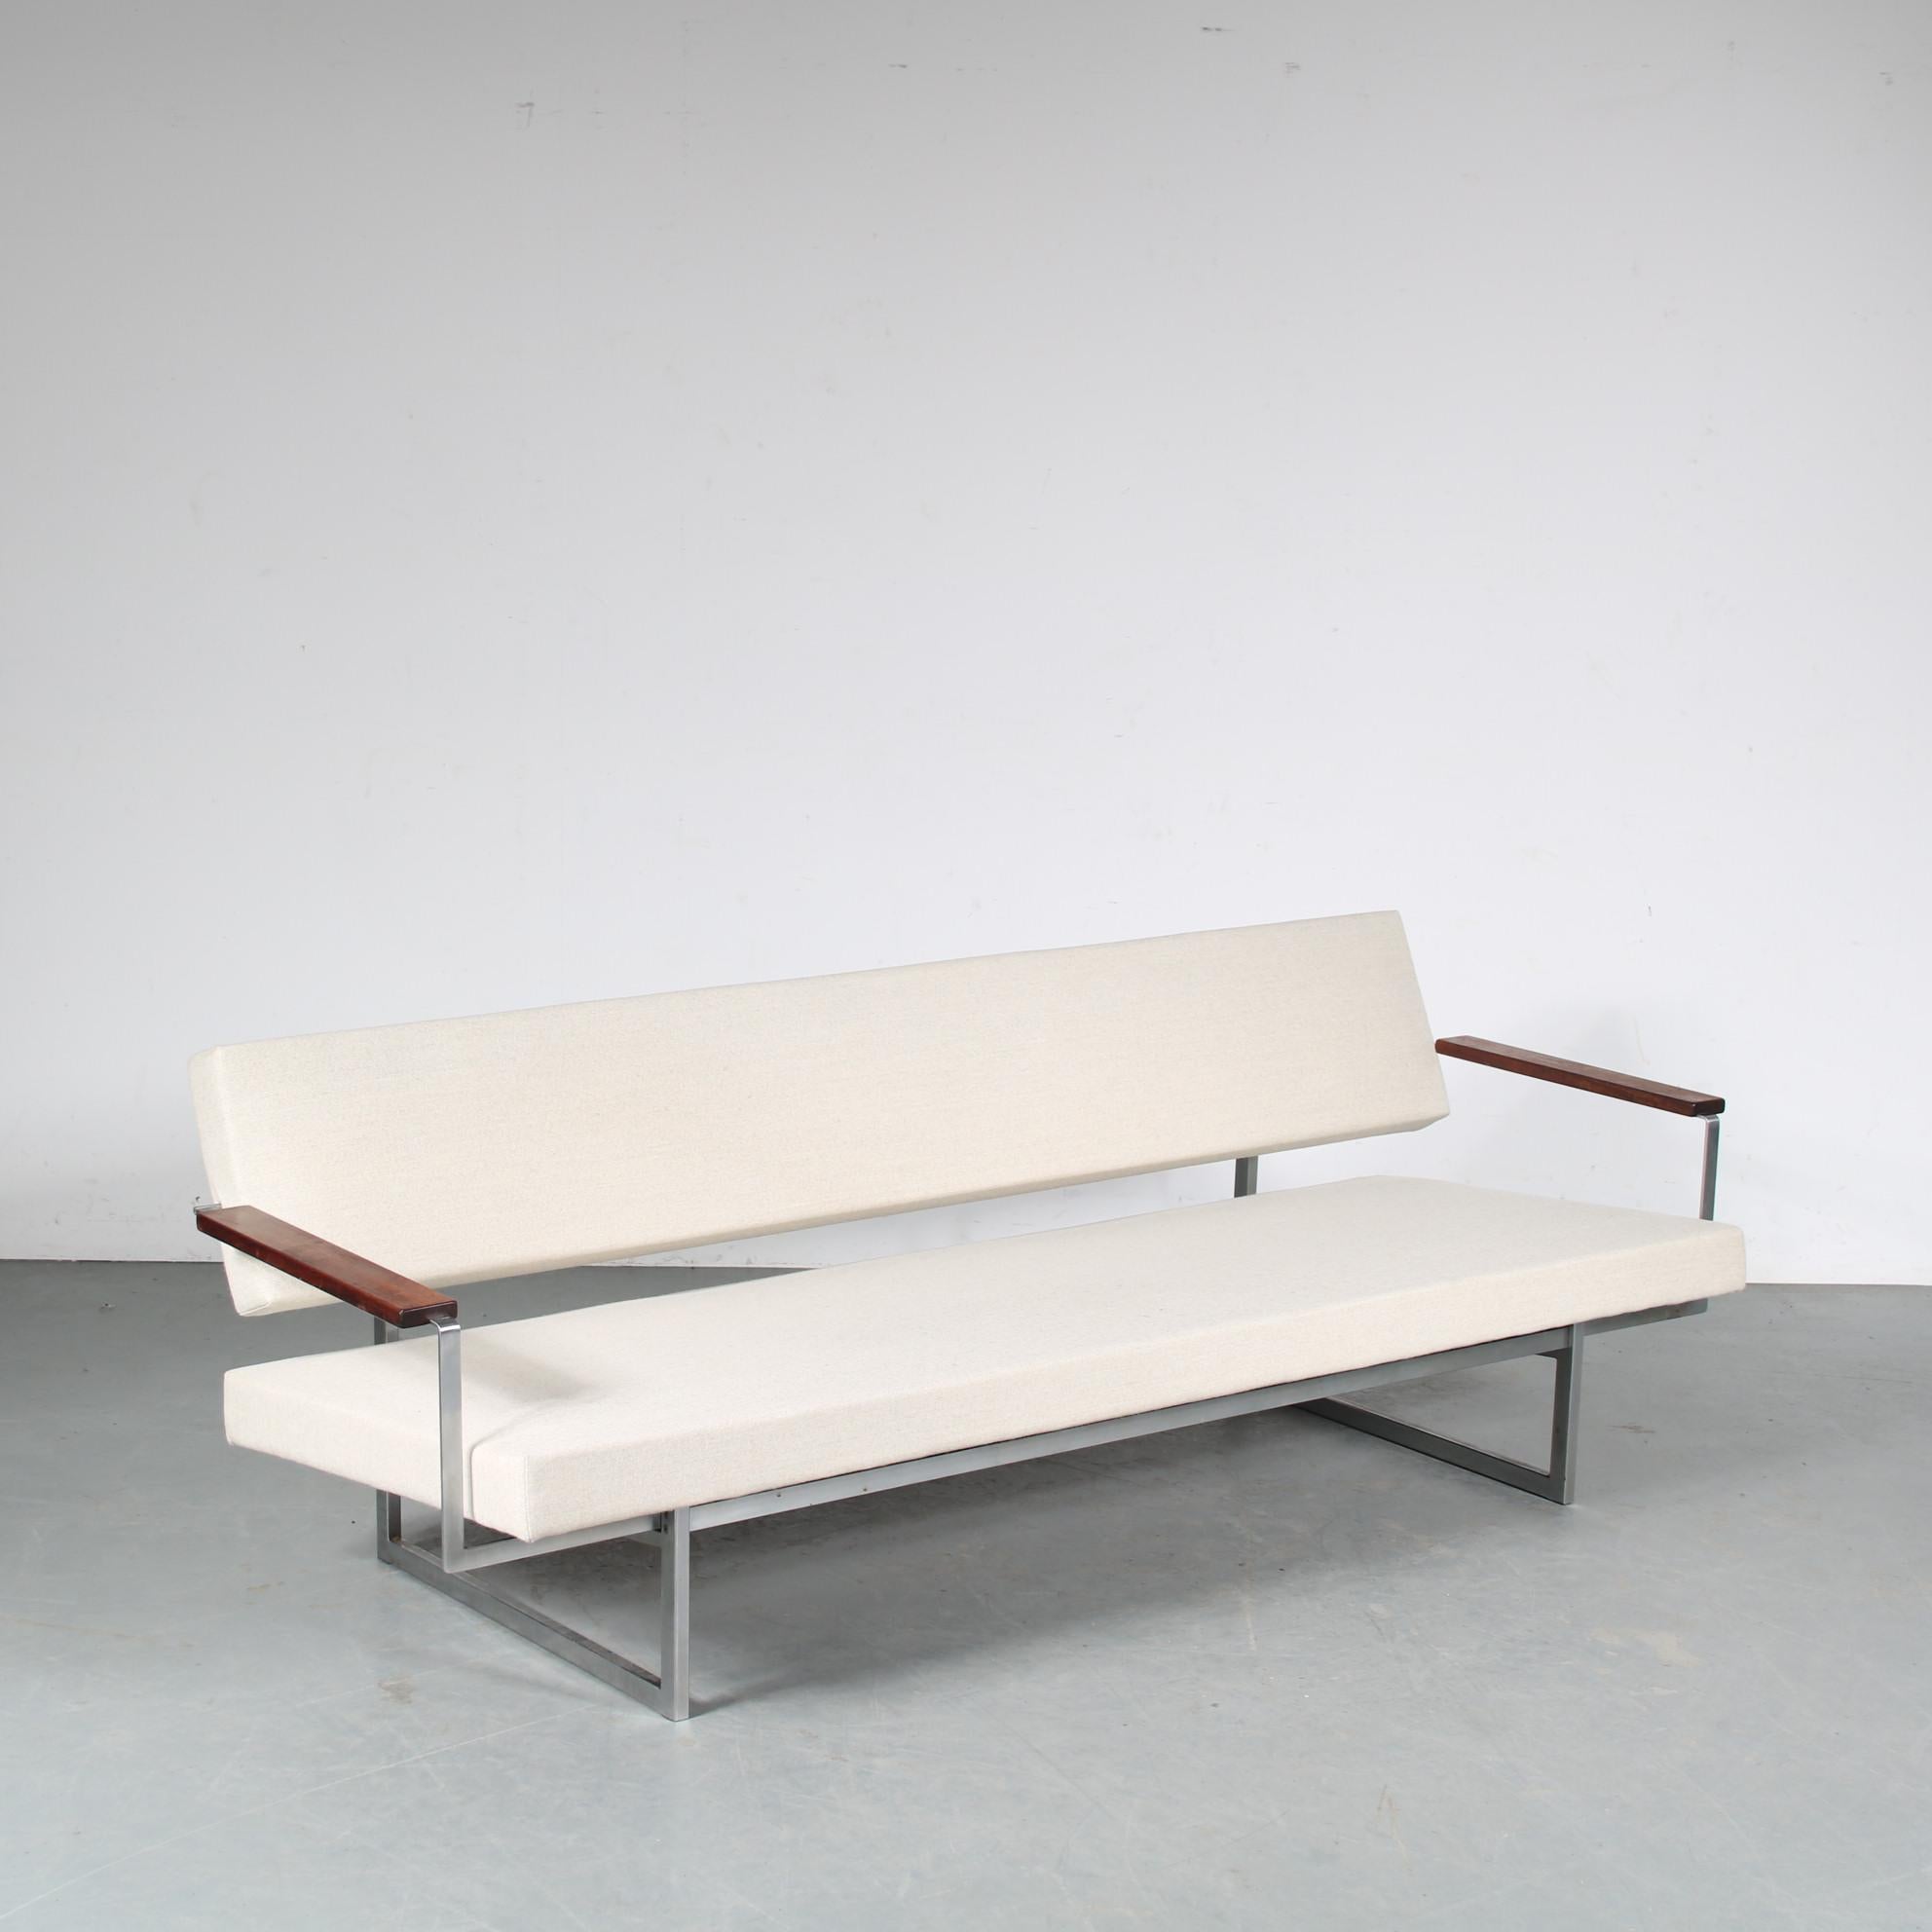 Dutch “Lotus” Sleeping Sofa by Rob Parry for Gelderland, the Netherlands 1960